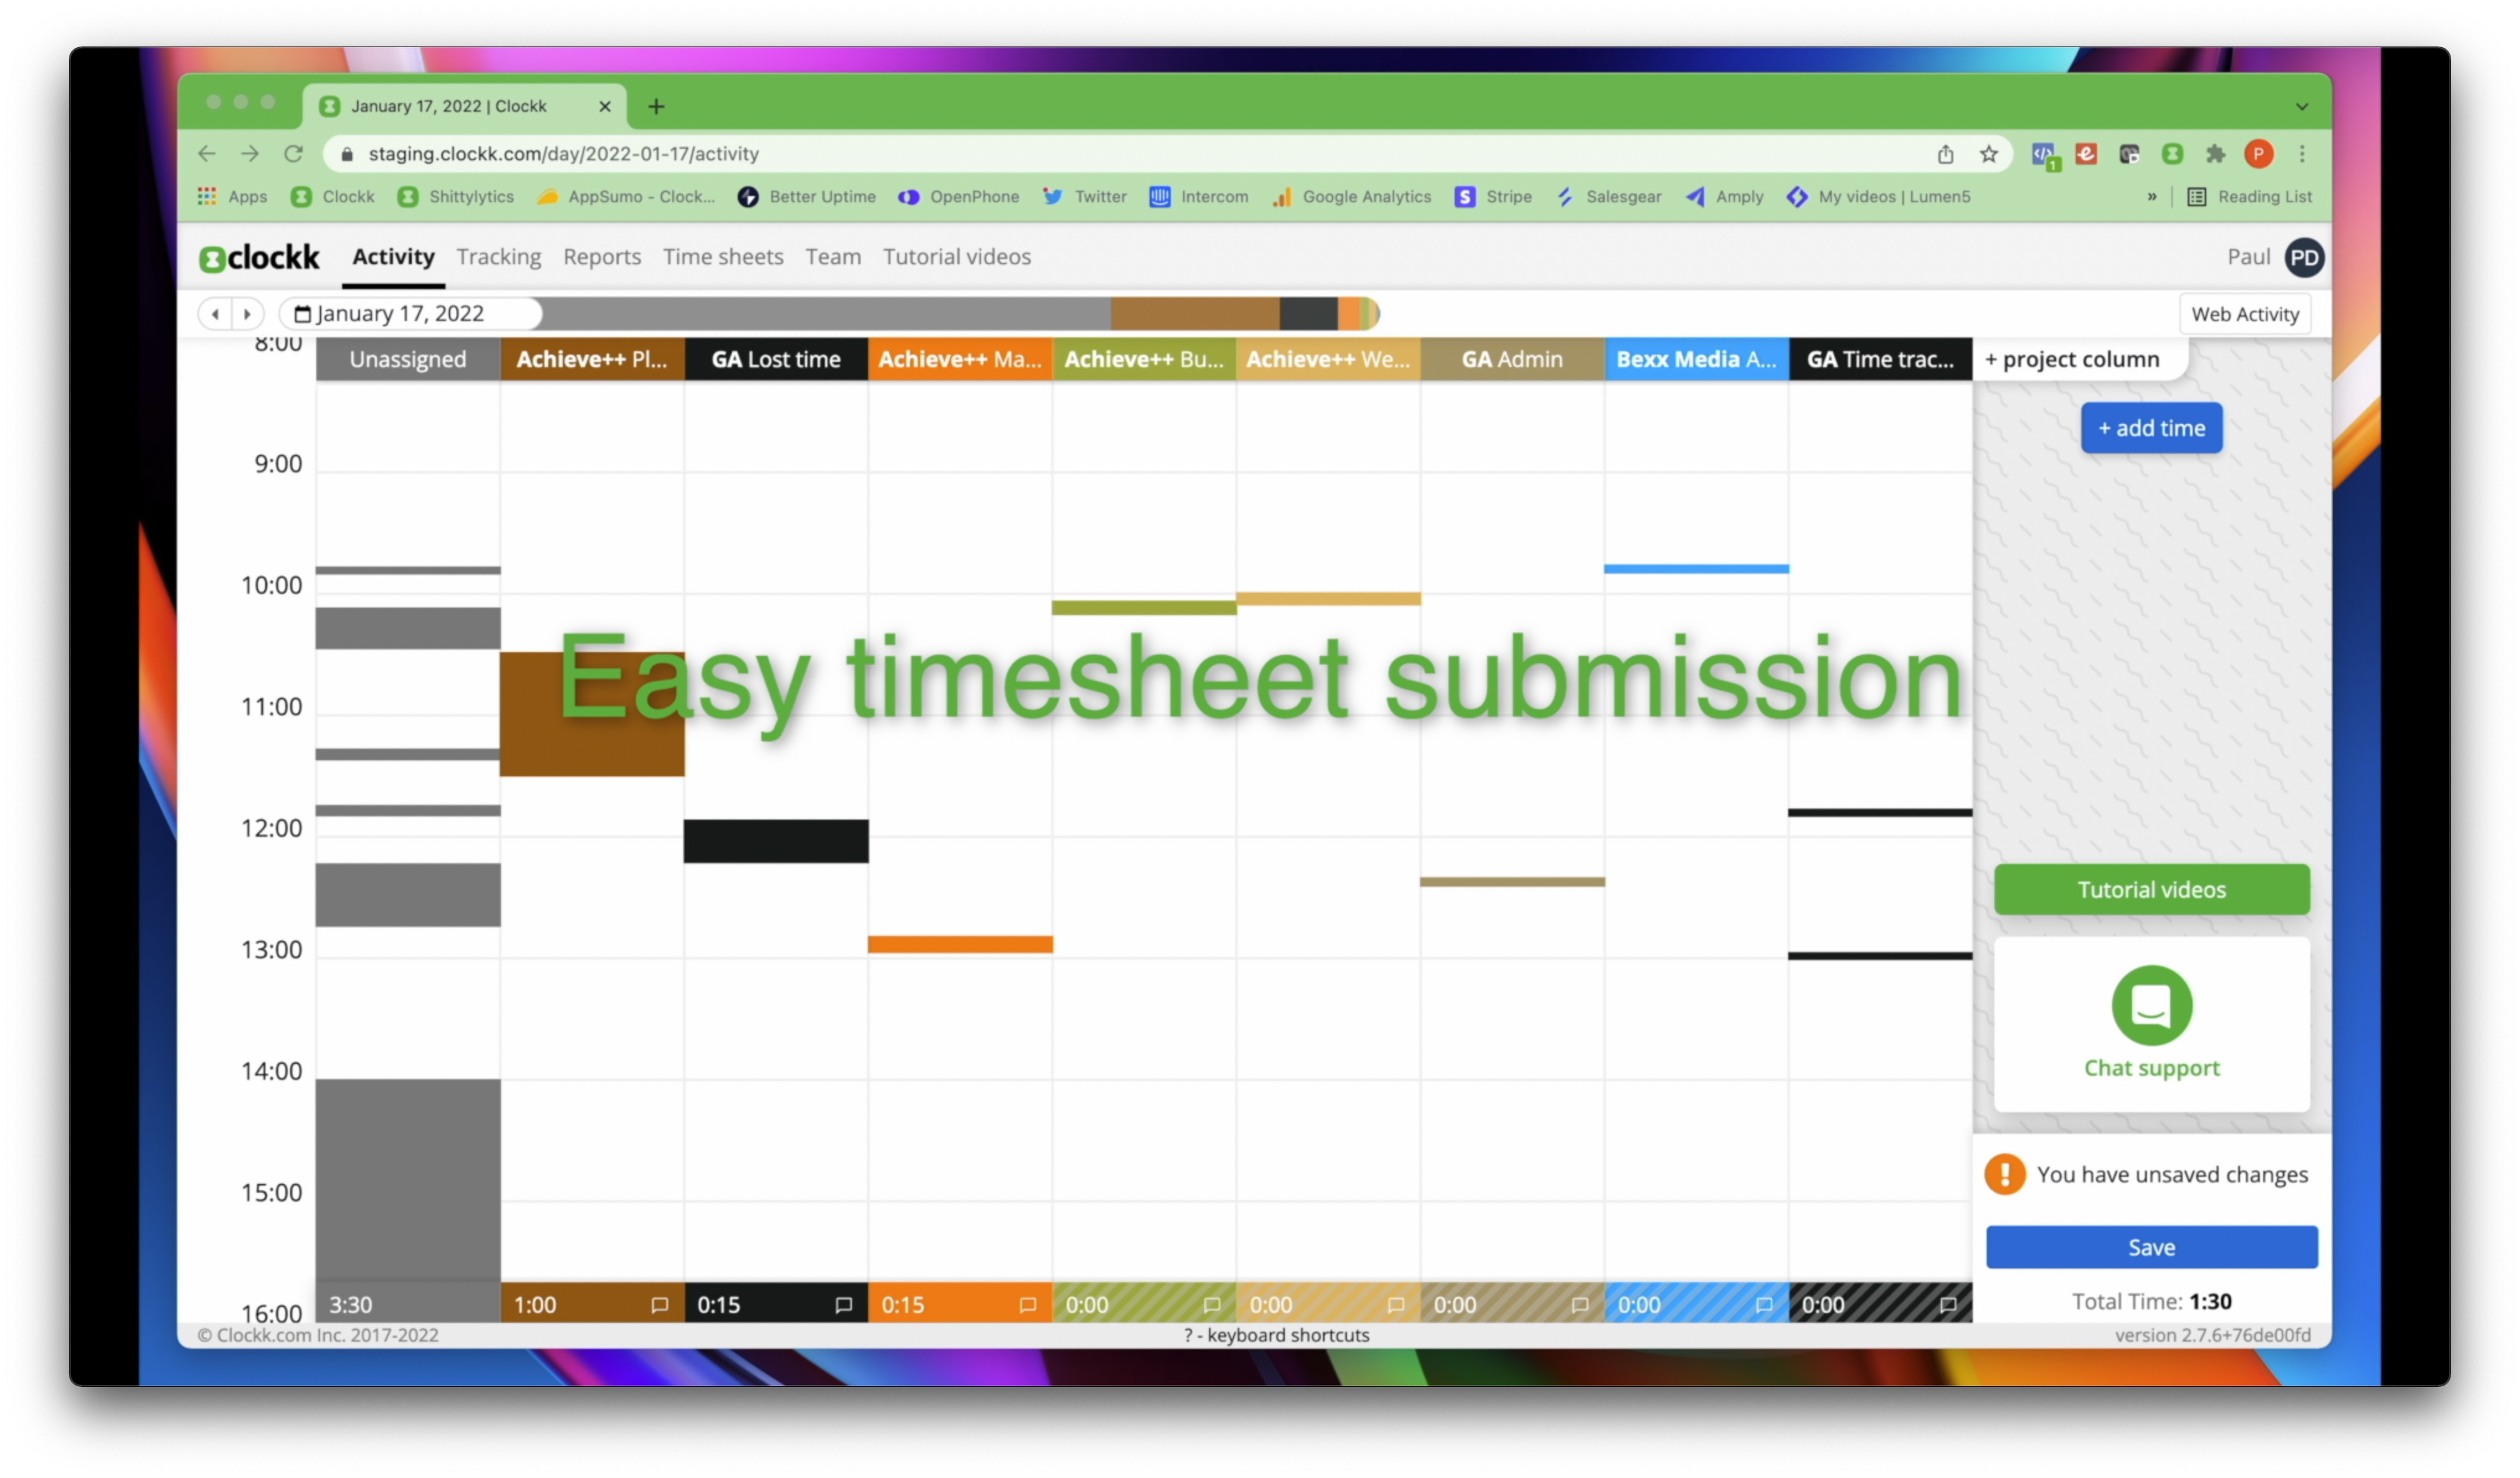 easy-timesheet-submission-image.jpg